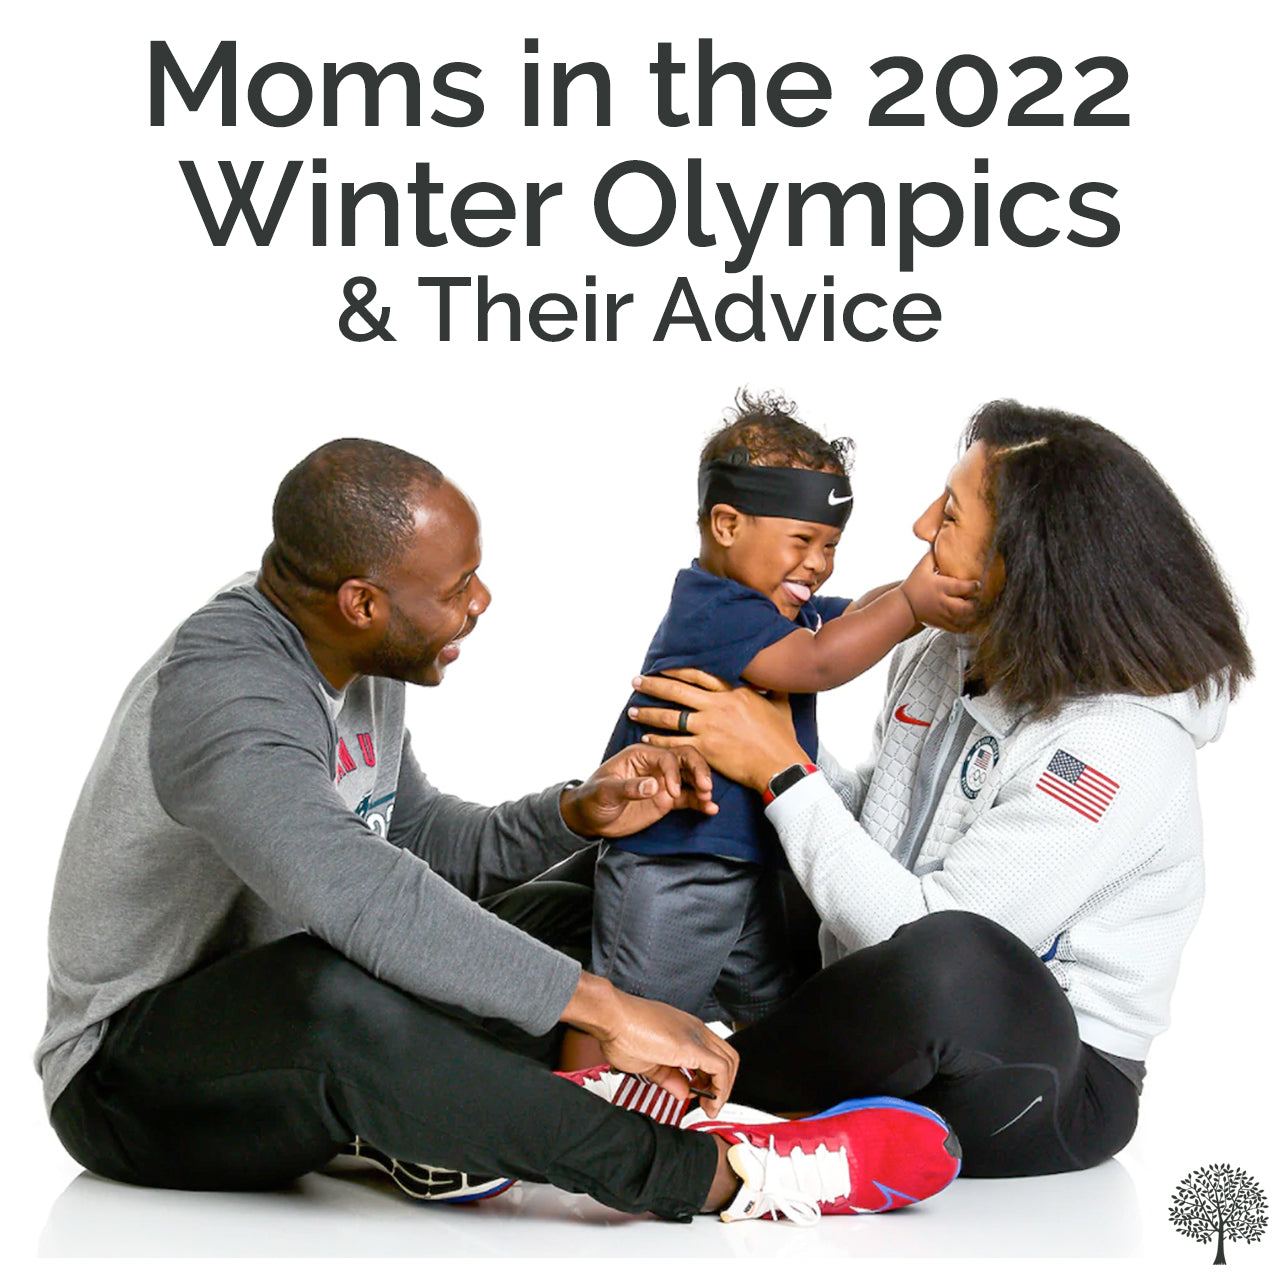 Moms in the 2022 Winter Olympics & Their Advice